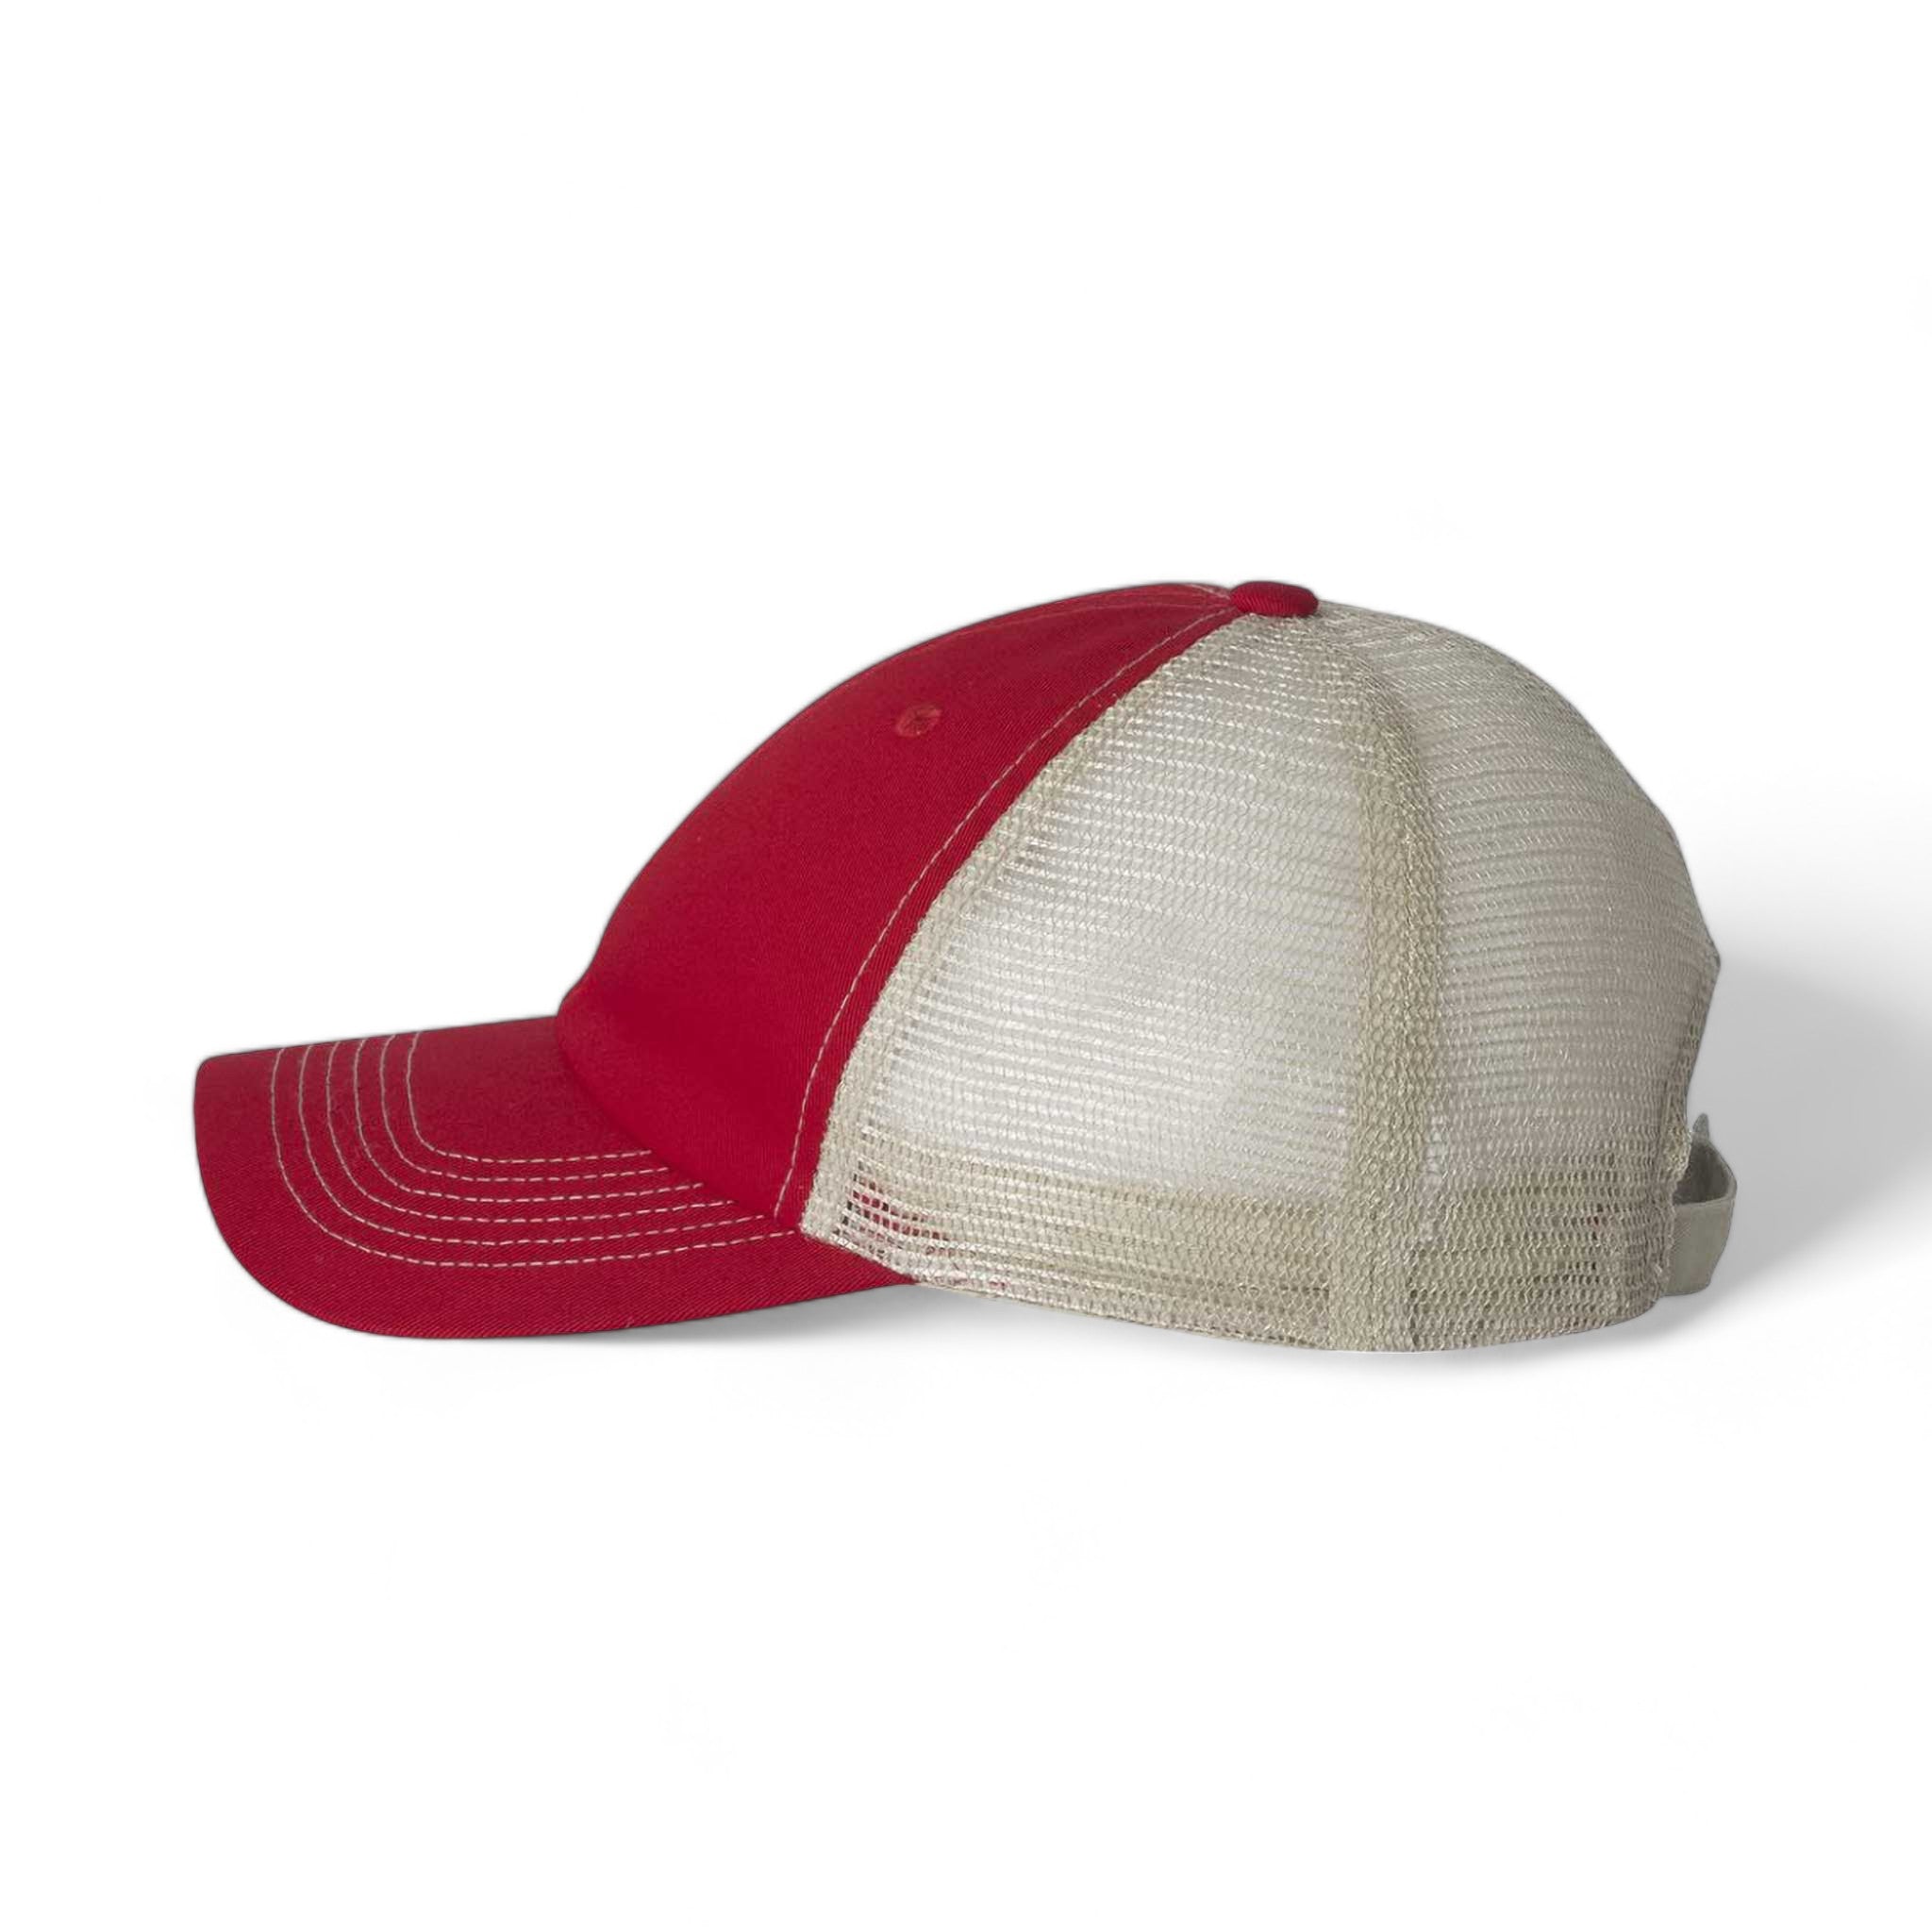 Side view of Sportsman 3100 custom hat in red and stone